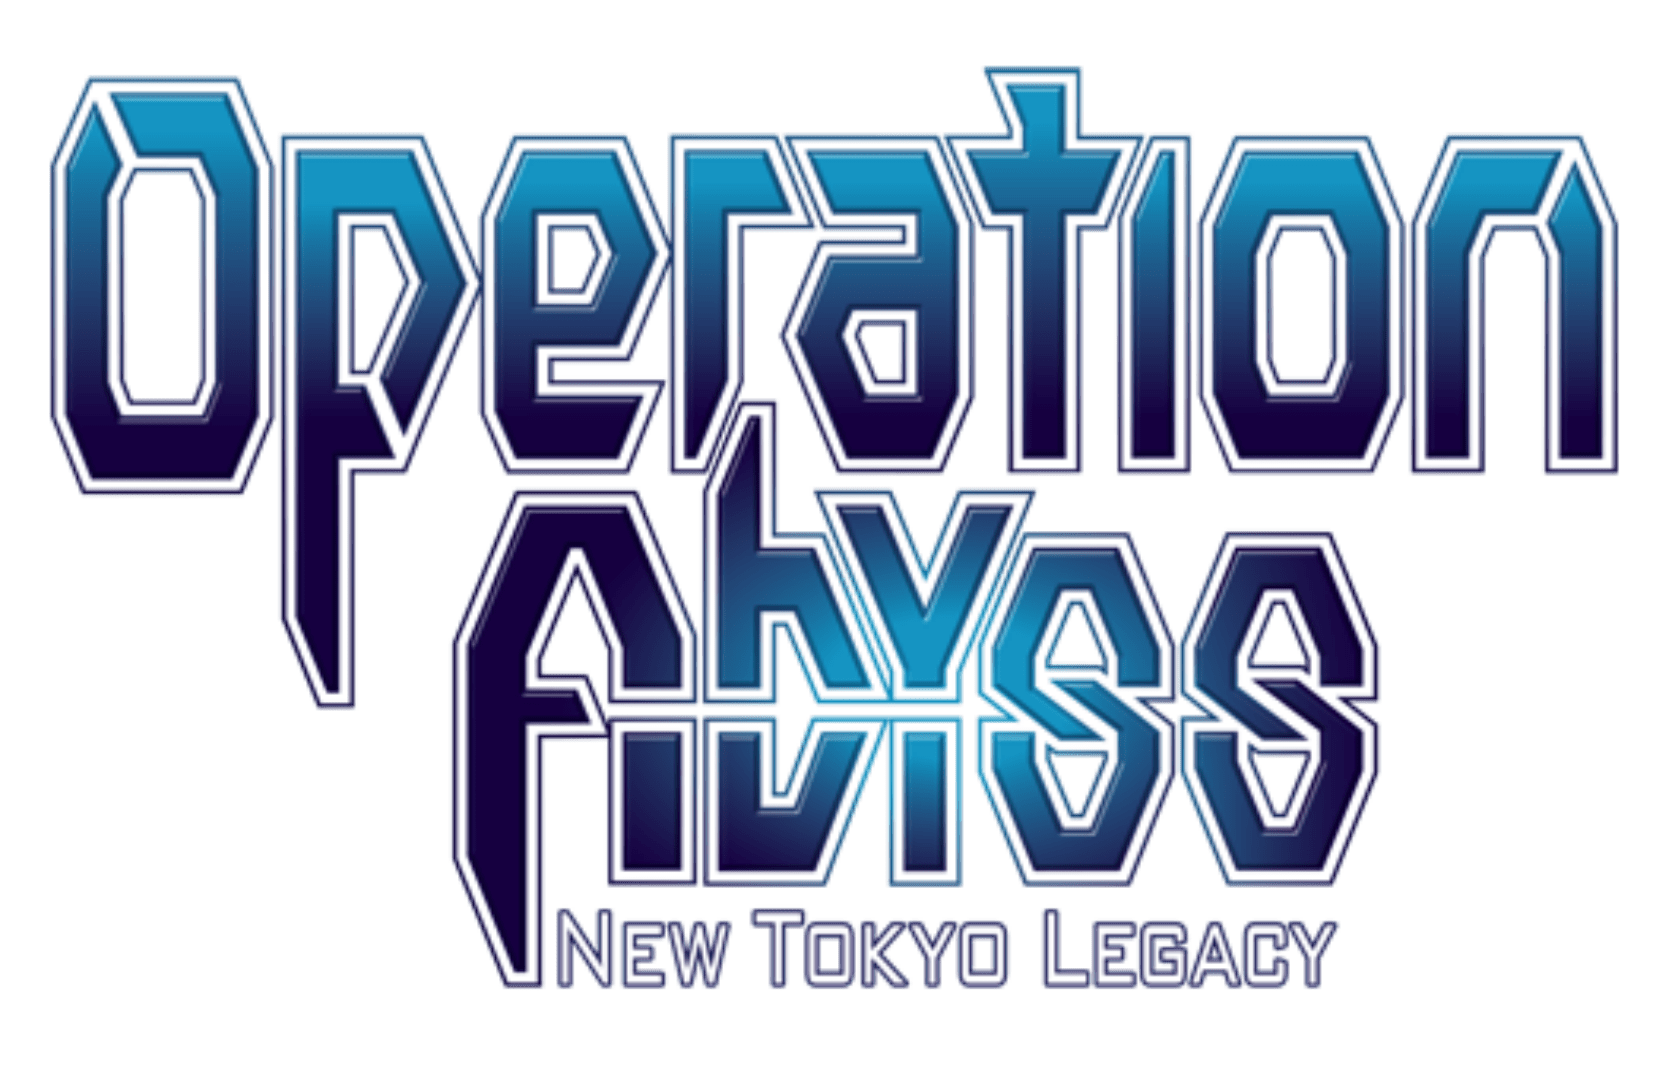 New Trailer and DLC announced for Operation Abyss: New Tokyo Legacy